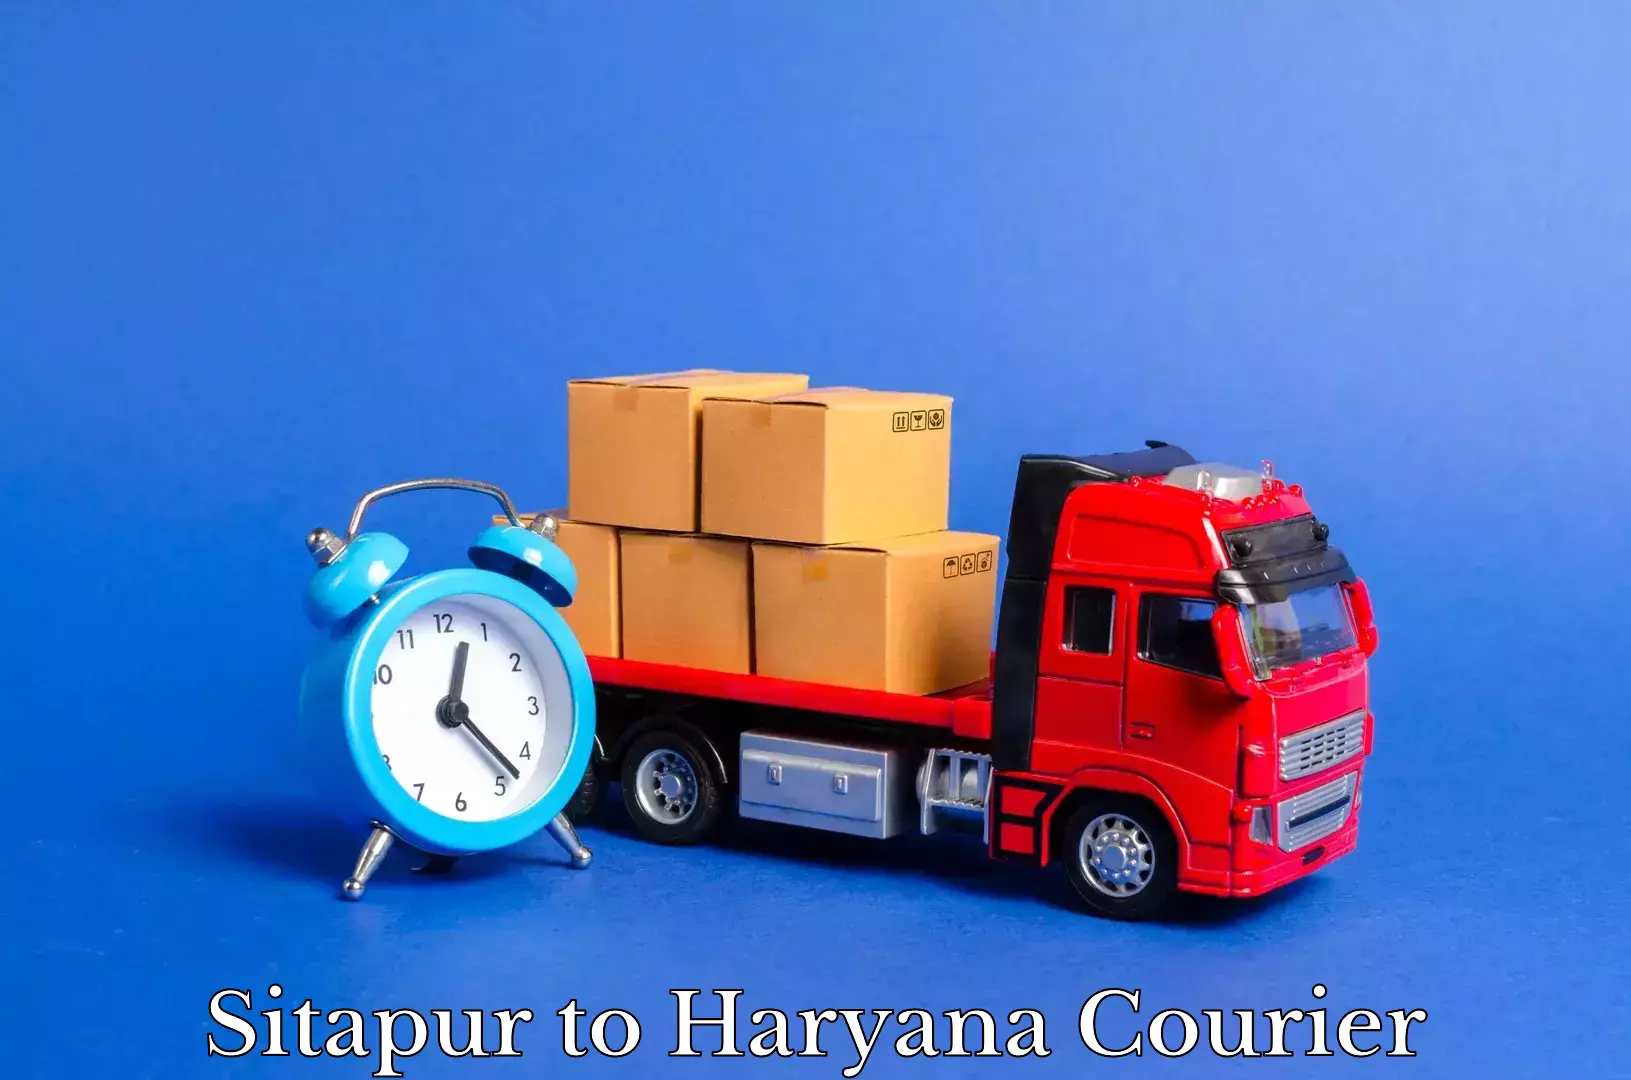 Budget-friendly movers Sitapur to Panipat